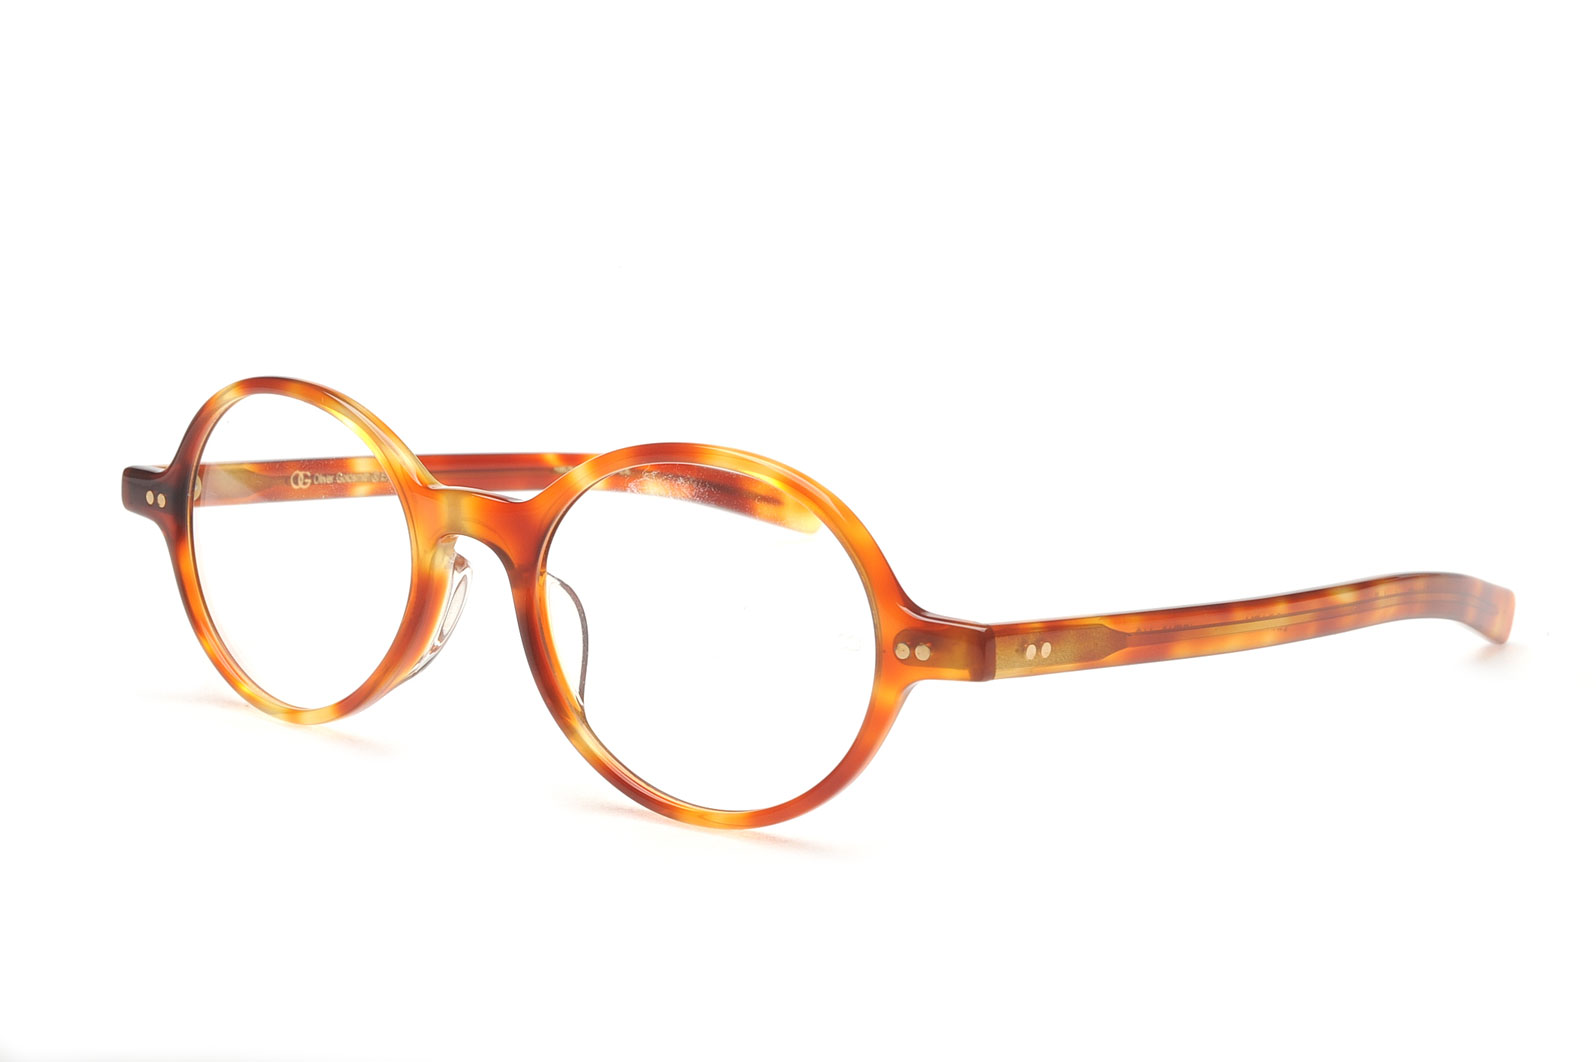 LIBRARY — OLIVER GOLDSMITH SPECTACLES